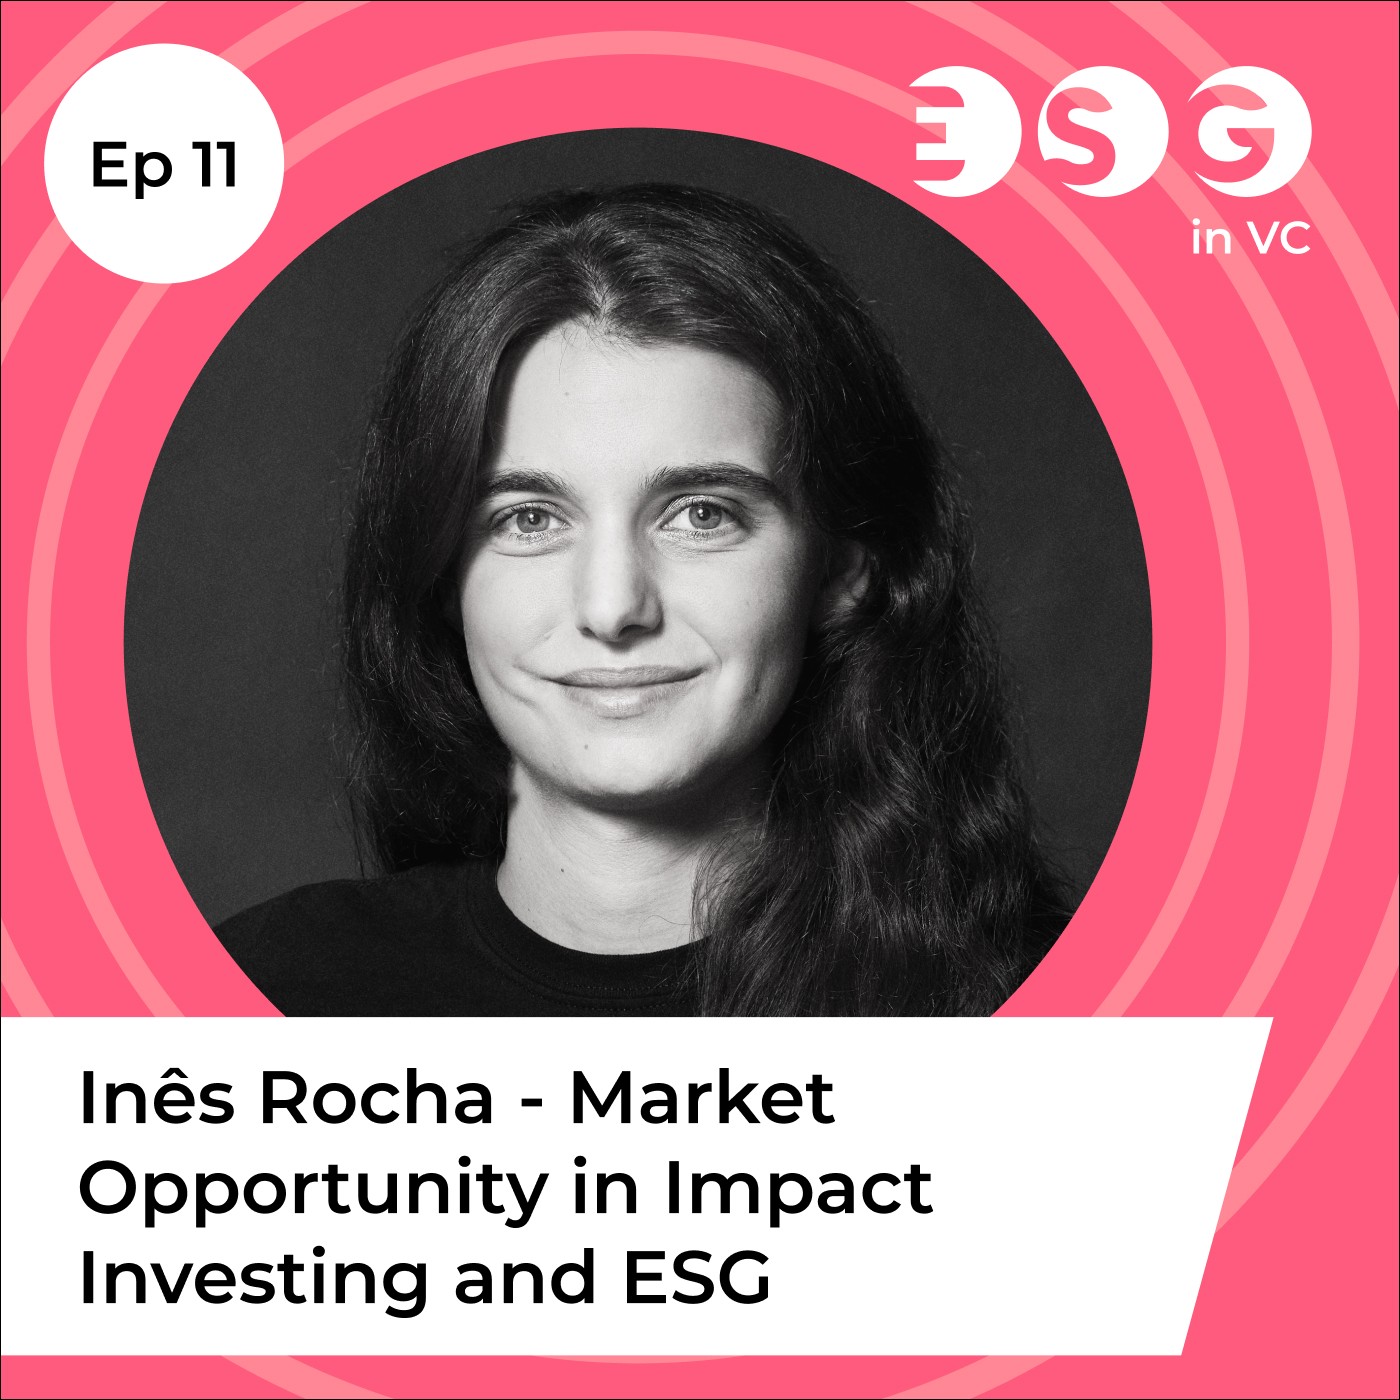 Ep 11 - Inês Rocha – Market Opportunity in Impact Investing and ESG